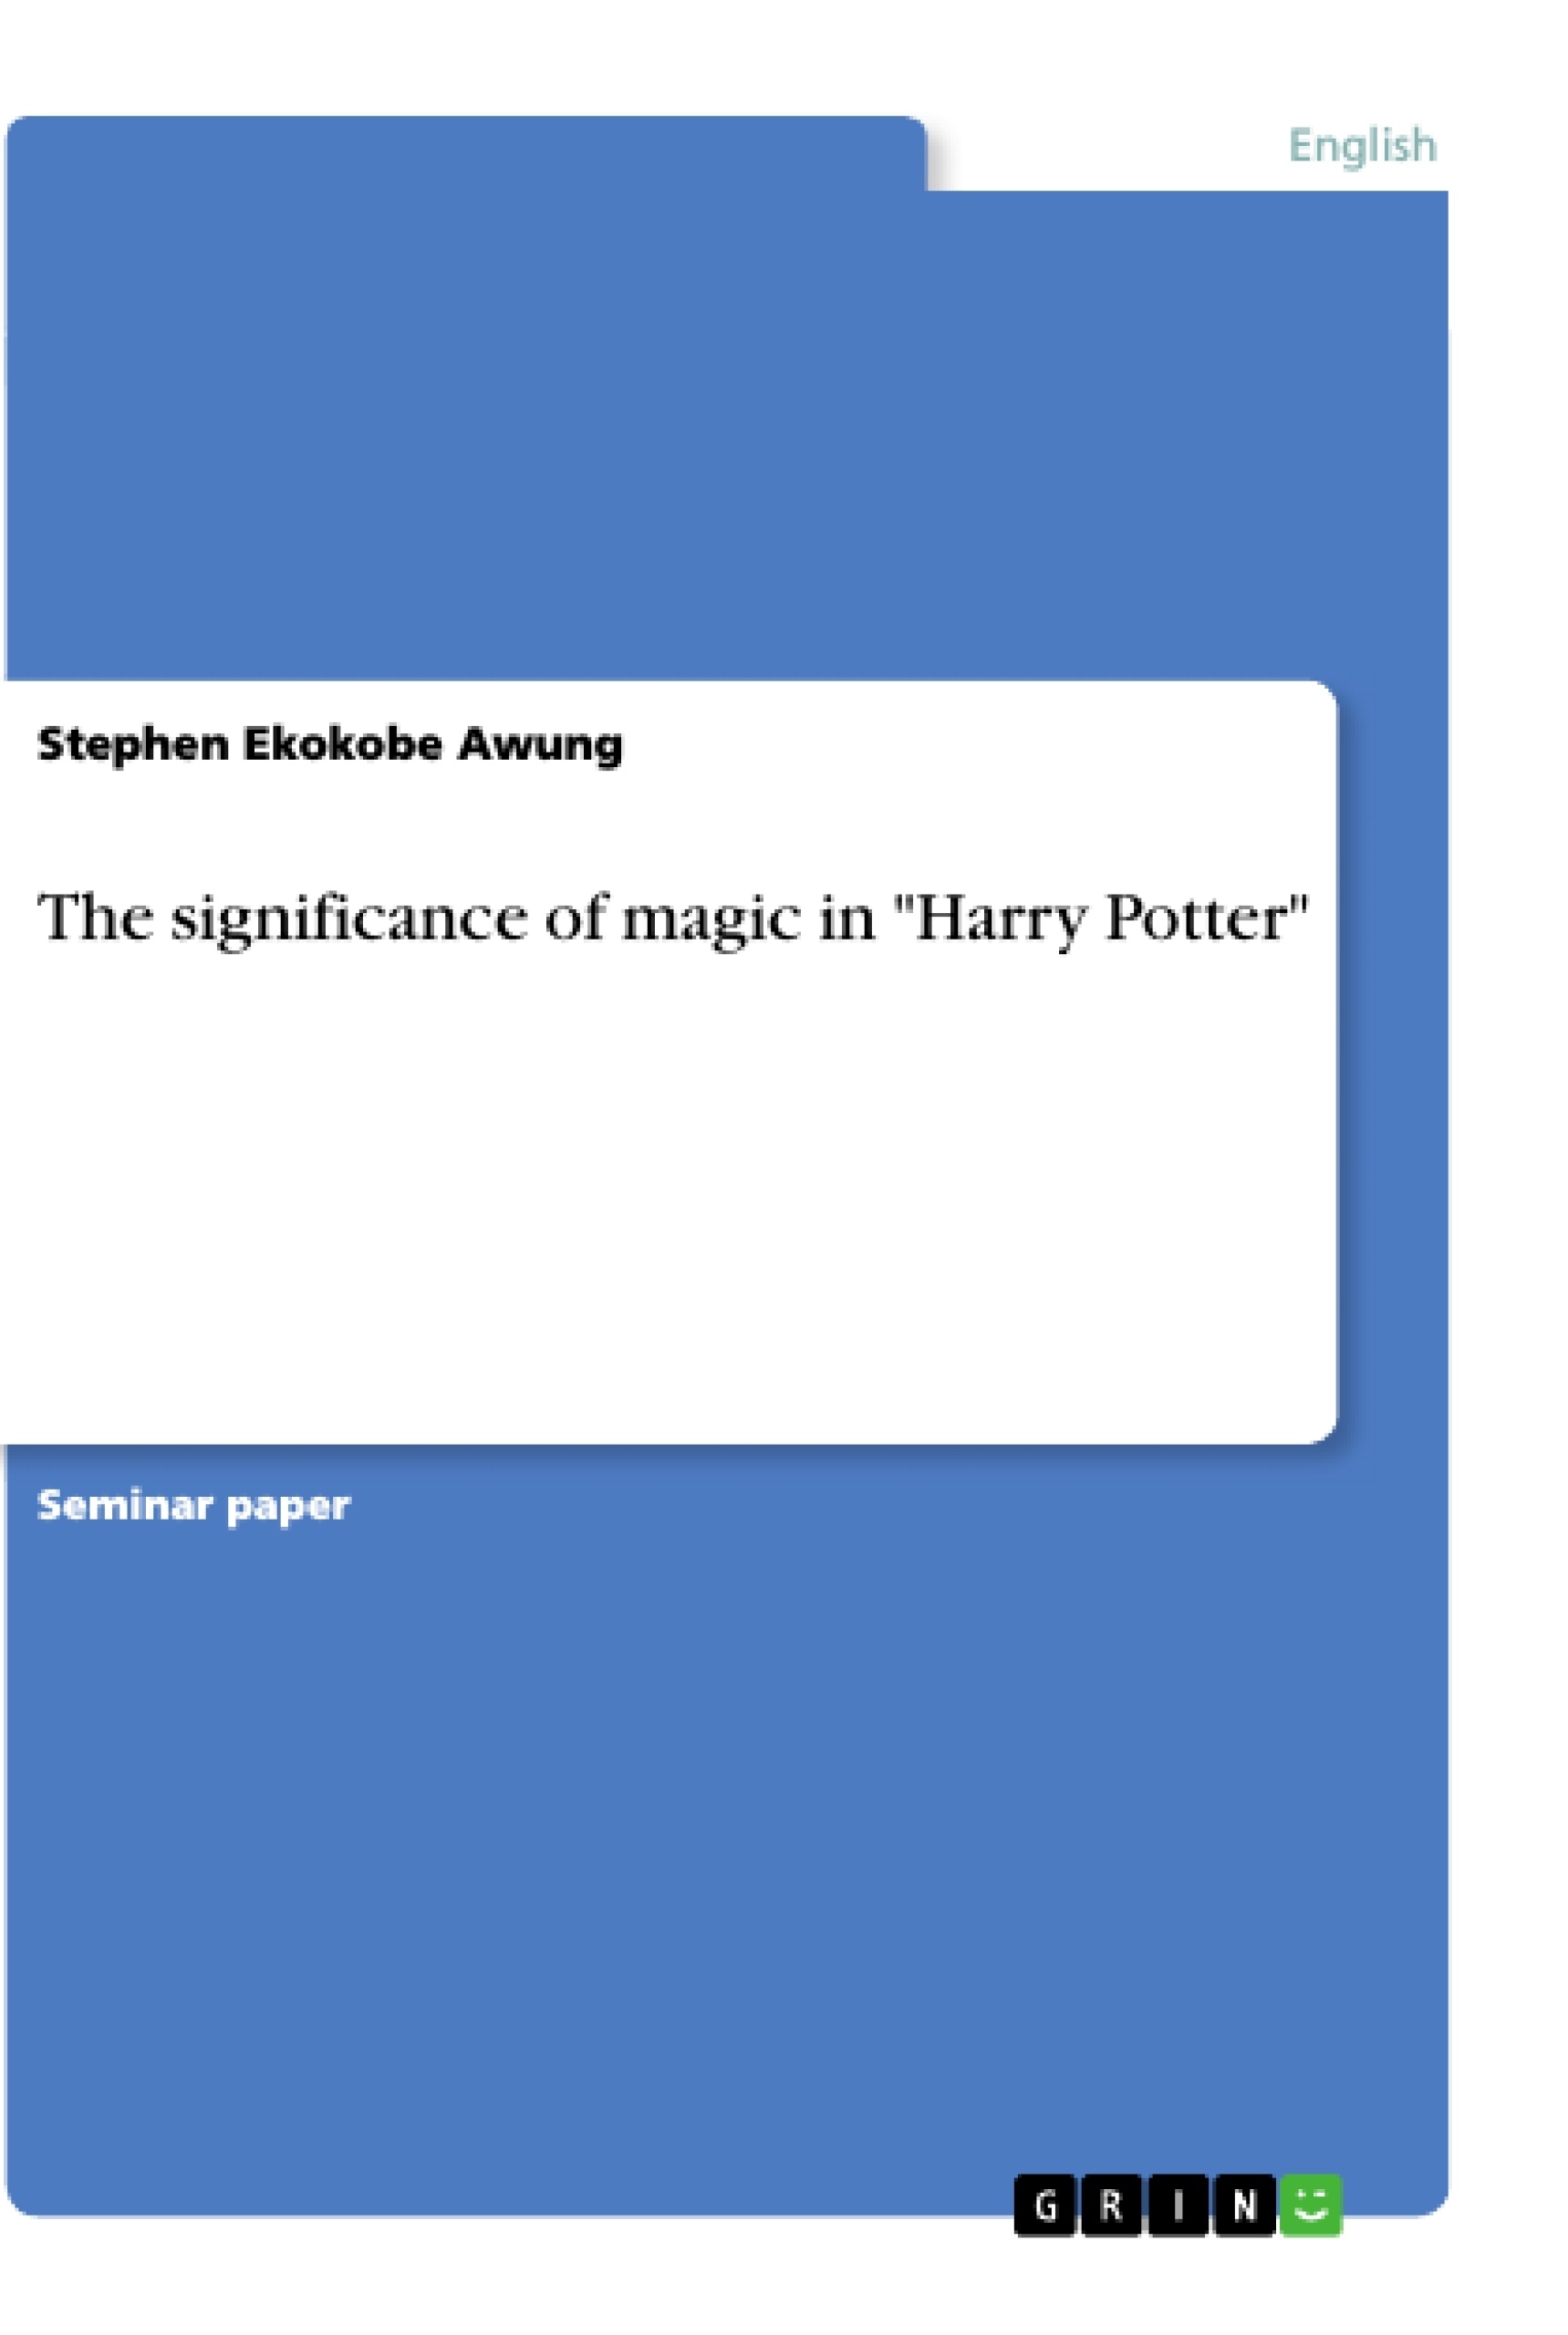 Titre: The significance of magic in "Harry Potter"